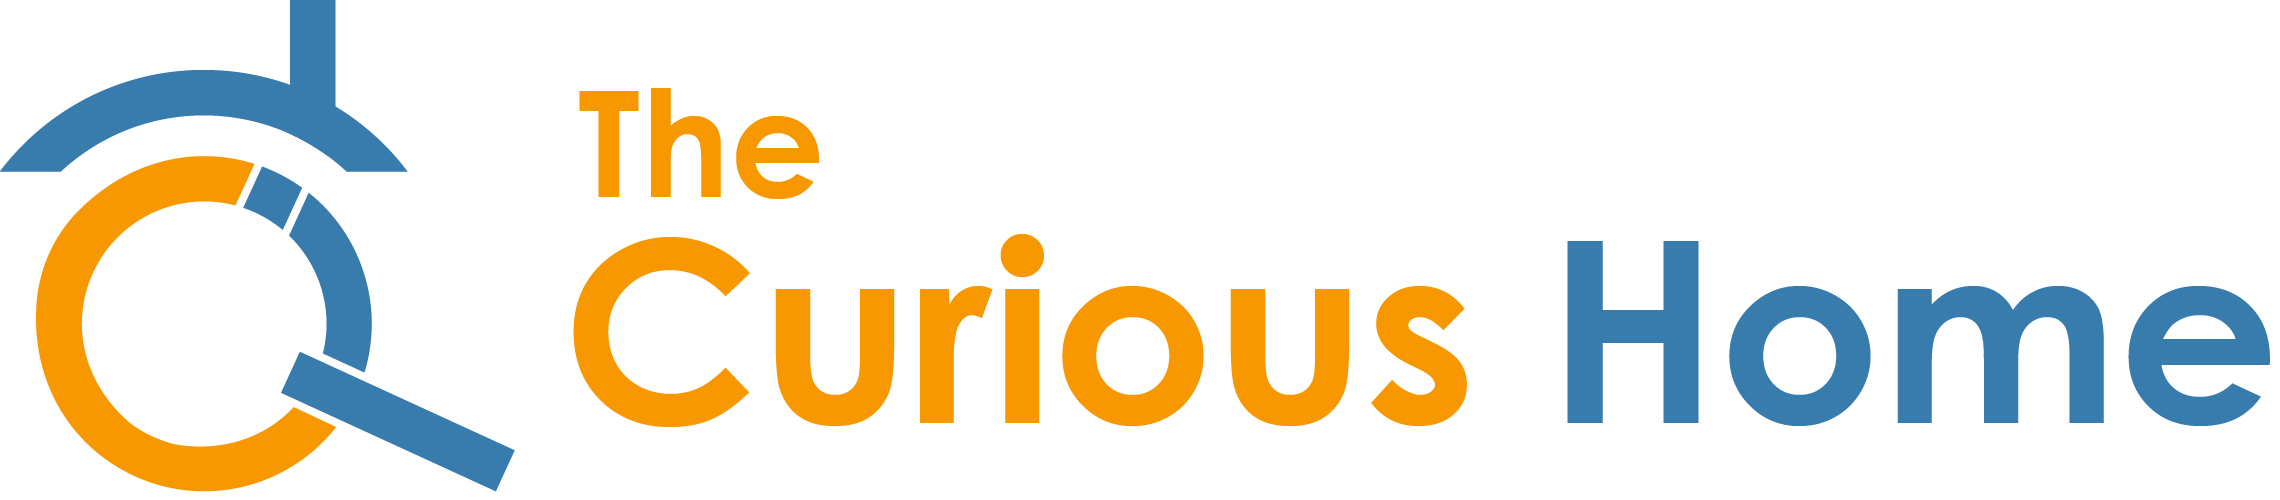 The Curious Home